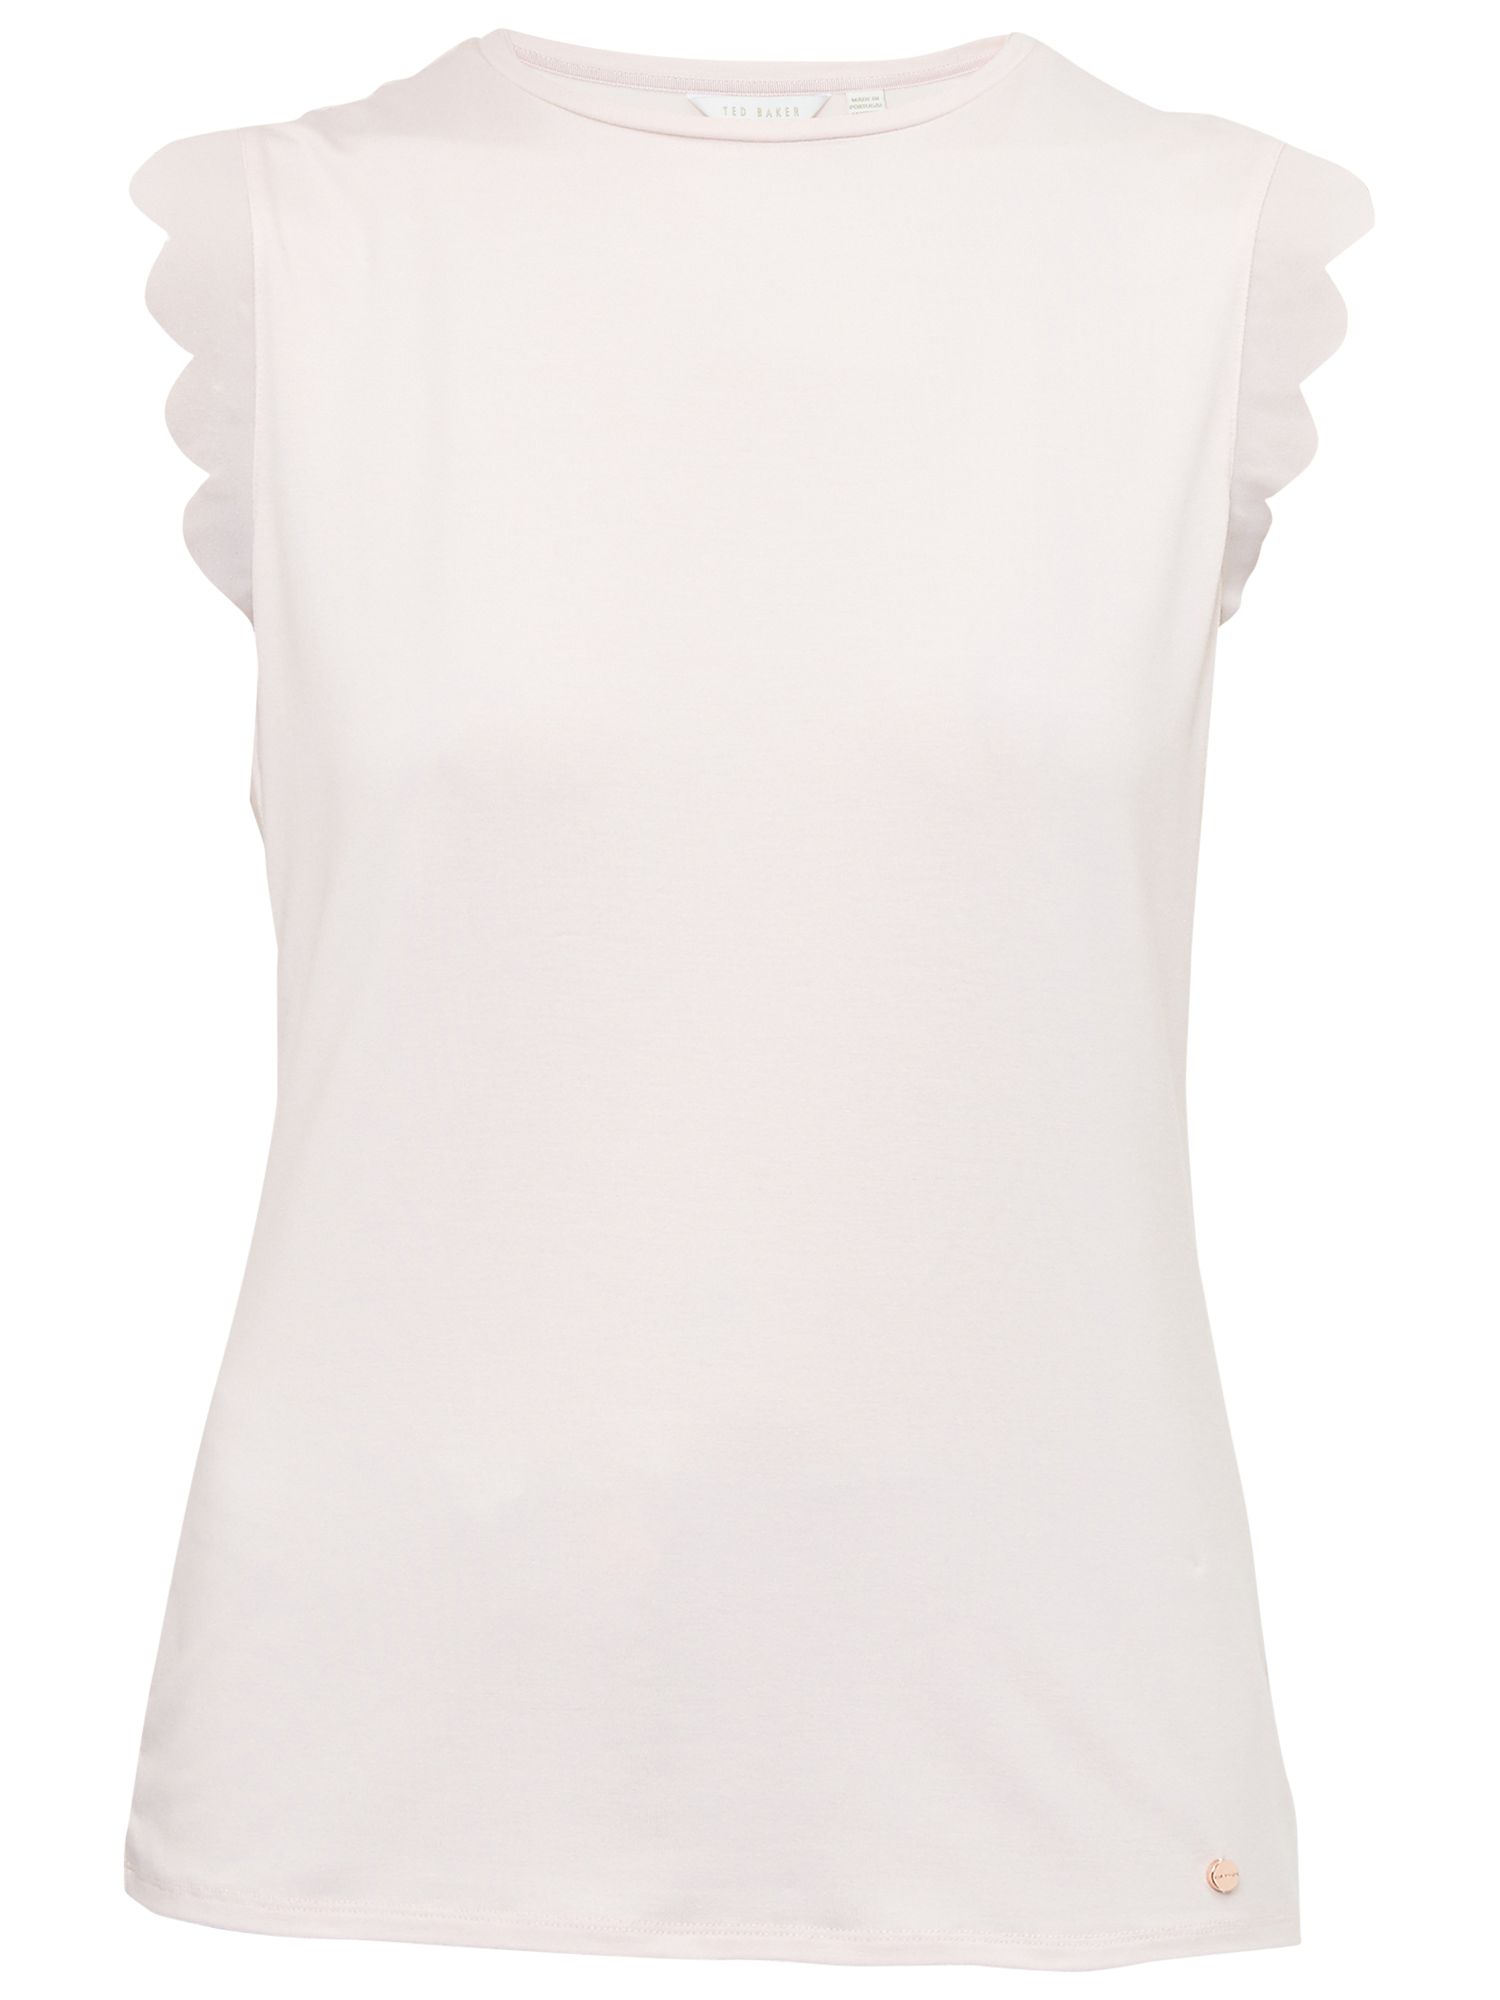 Ted Baker Elliah Scallop Detail Top